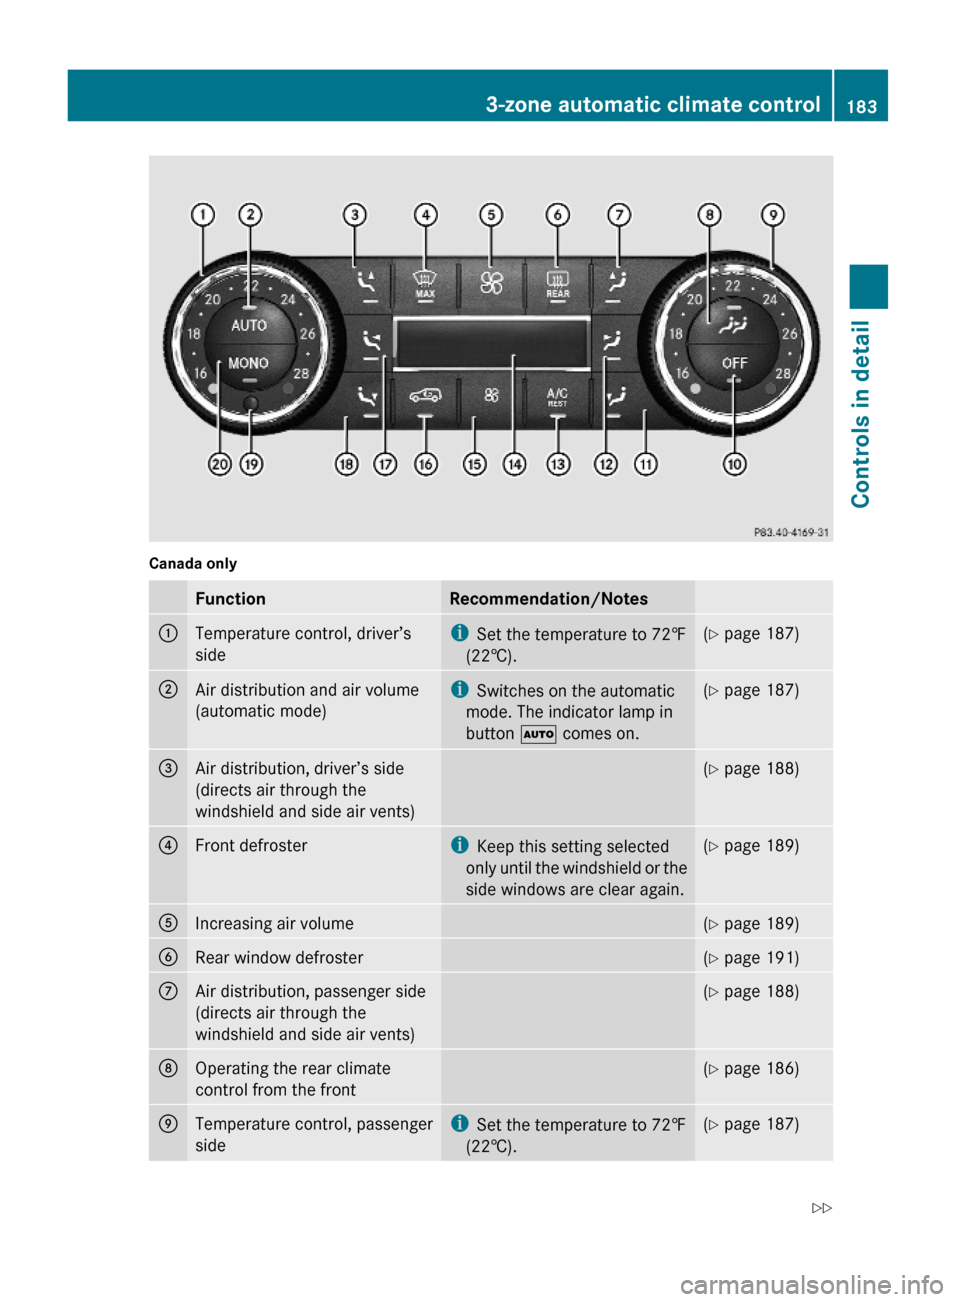 MERCEDES-BENZ GL450 2010 X164 User Guide Canada onlyFunctionRecommendation/Notes:Temperature control, driver’s
side
iSet the temperature to 72‡
(22†).
(Y page 187);Air distribution and air volume
(automatic mode)
iSwitches on the autom